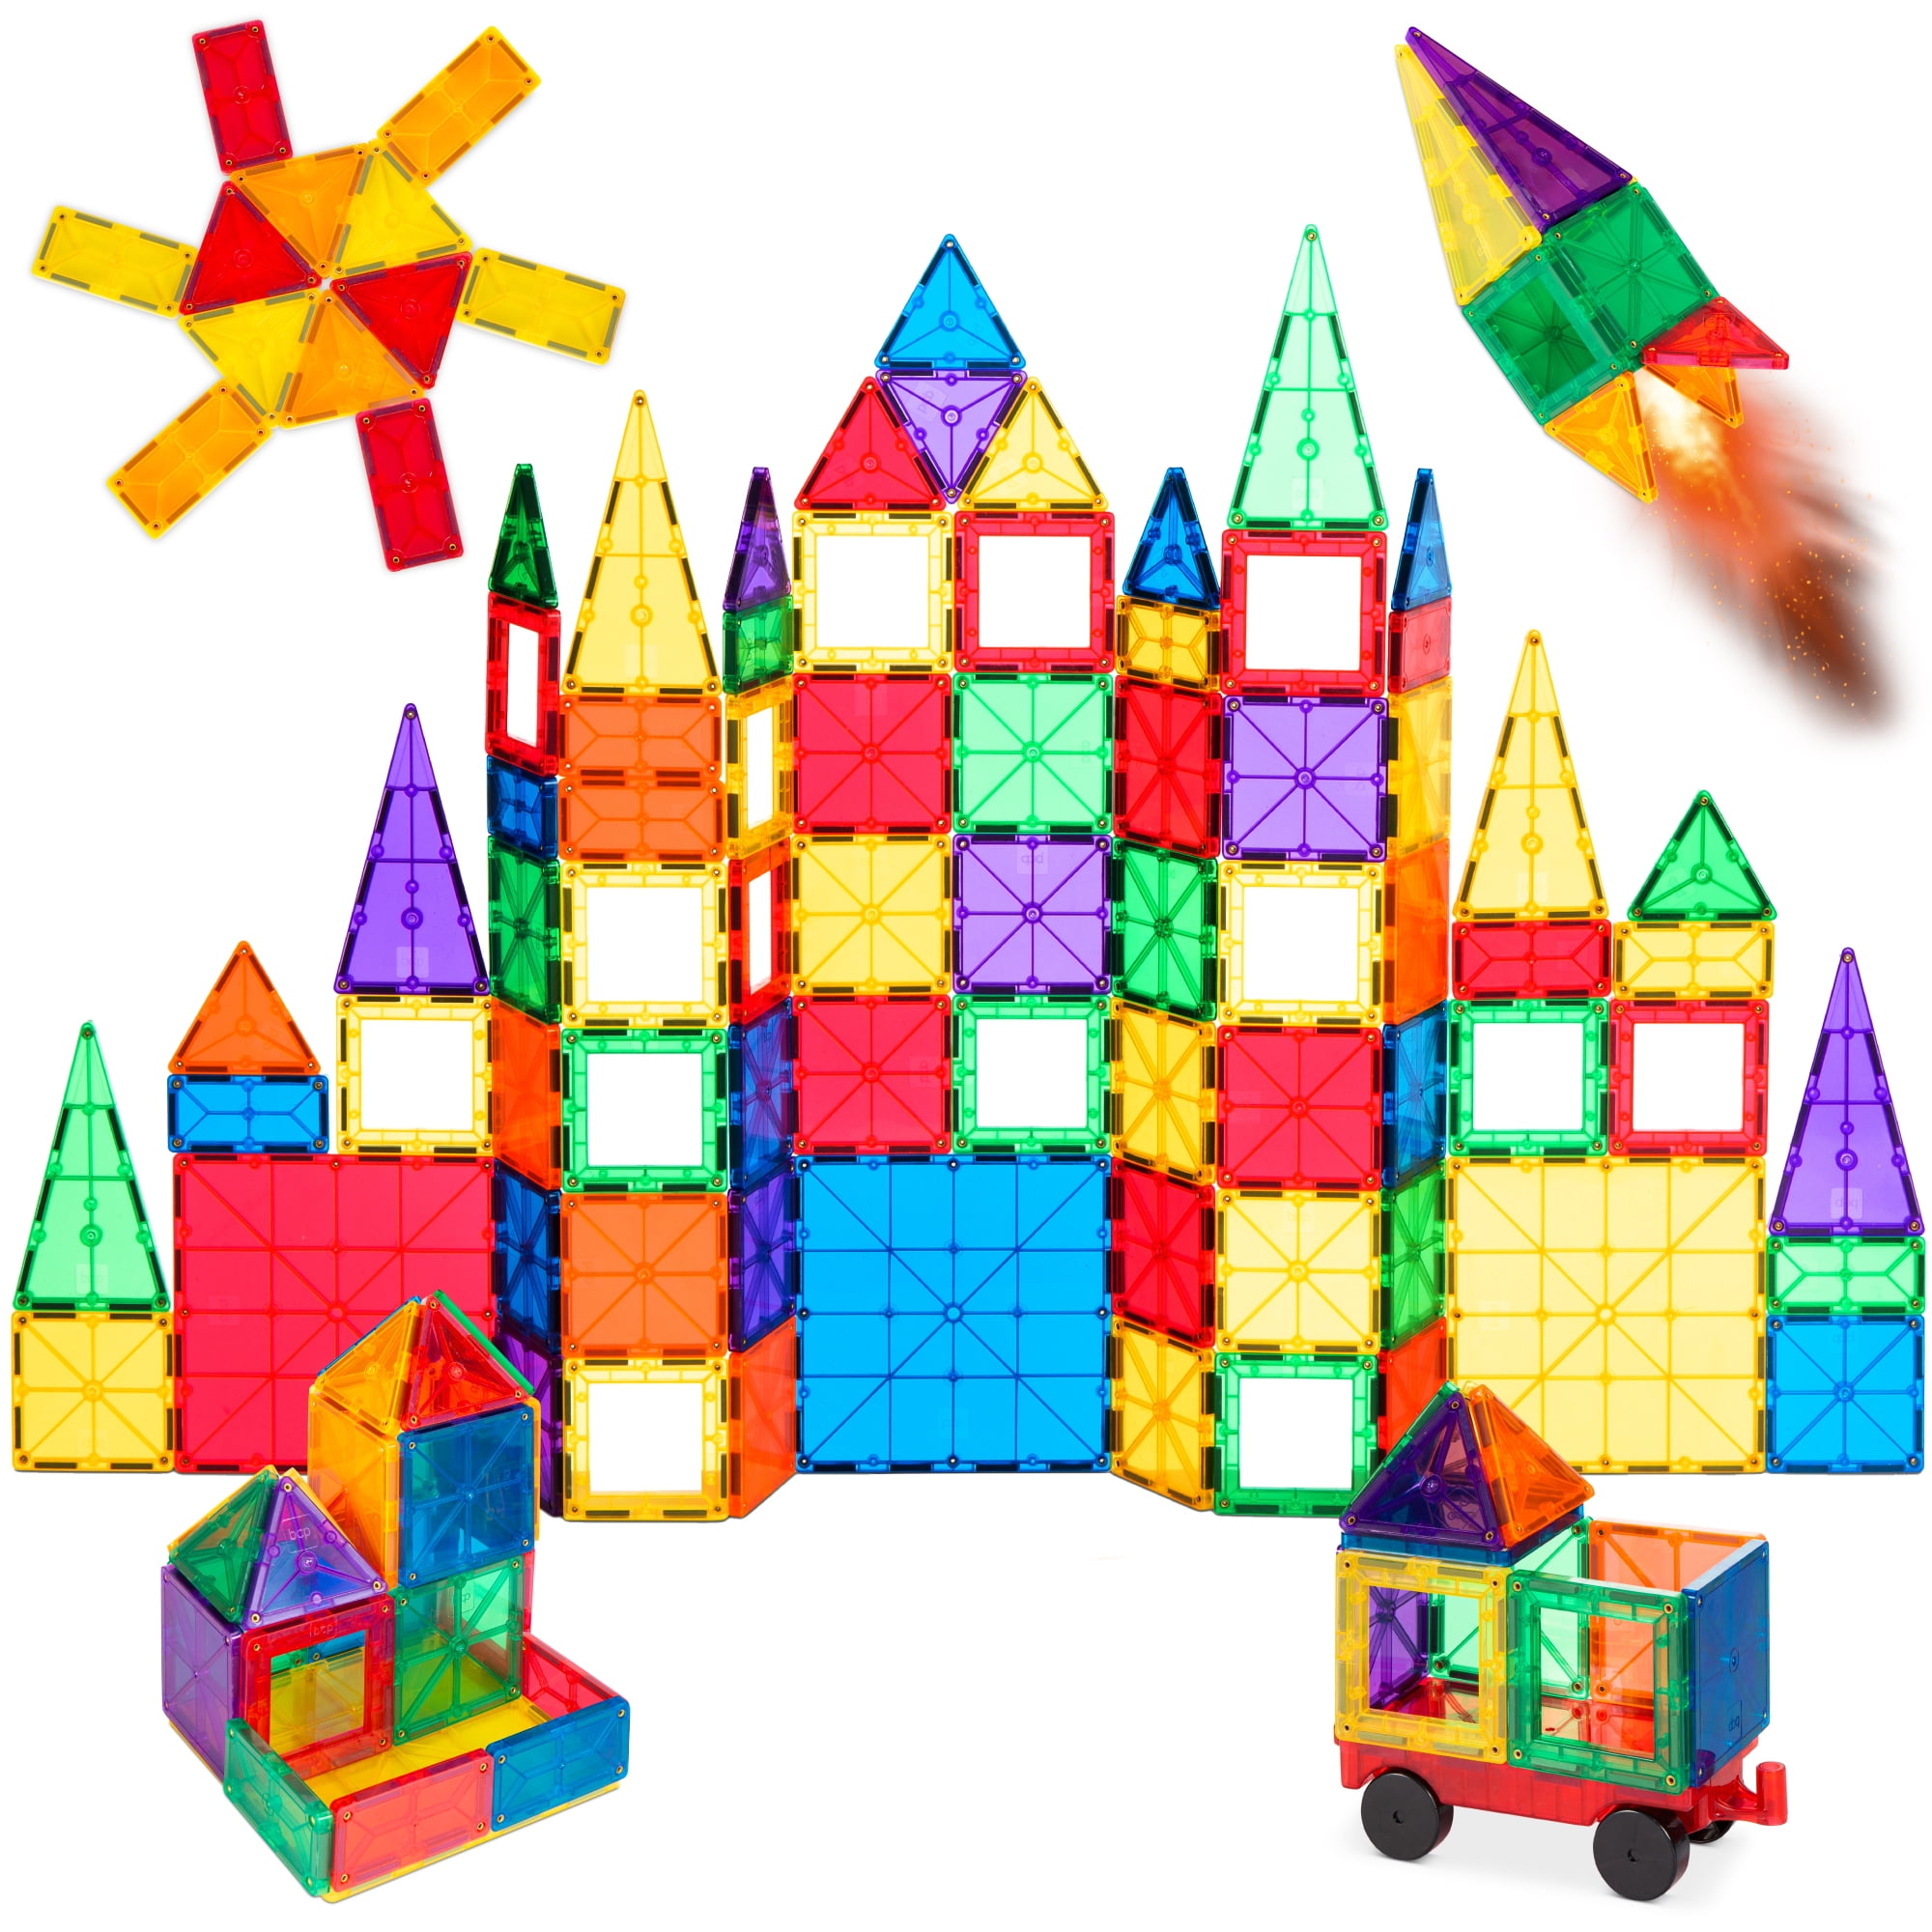 36 Pcs MagneticTiles,3D Magnet Building Block with Rivets-Fastened Fast Shipping 